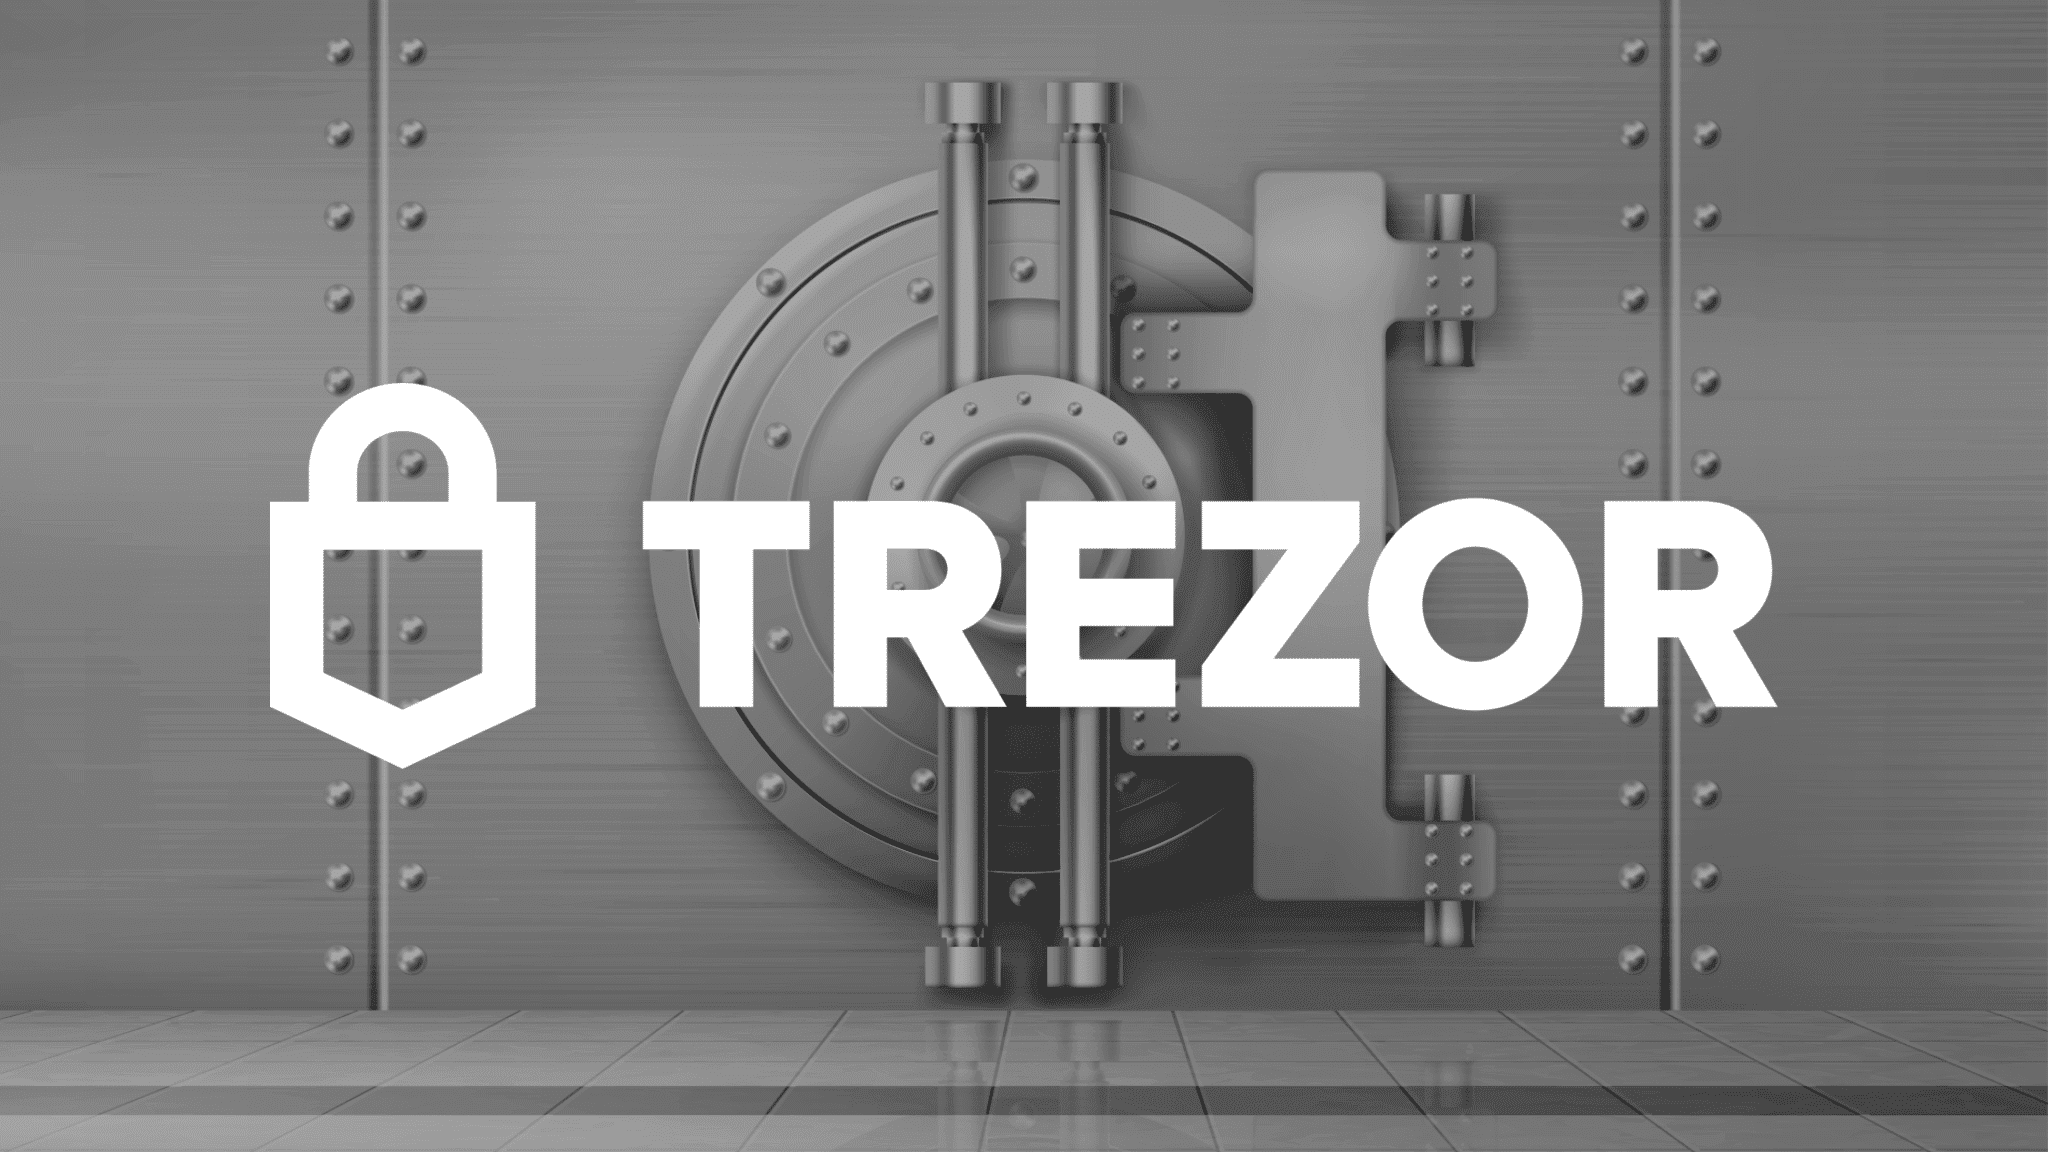 trezor best hardware wallet for cold storage for bitcoin and crypto